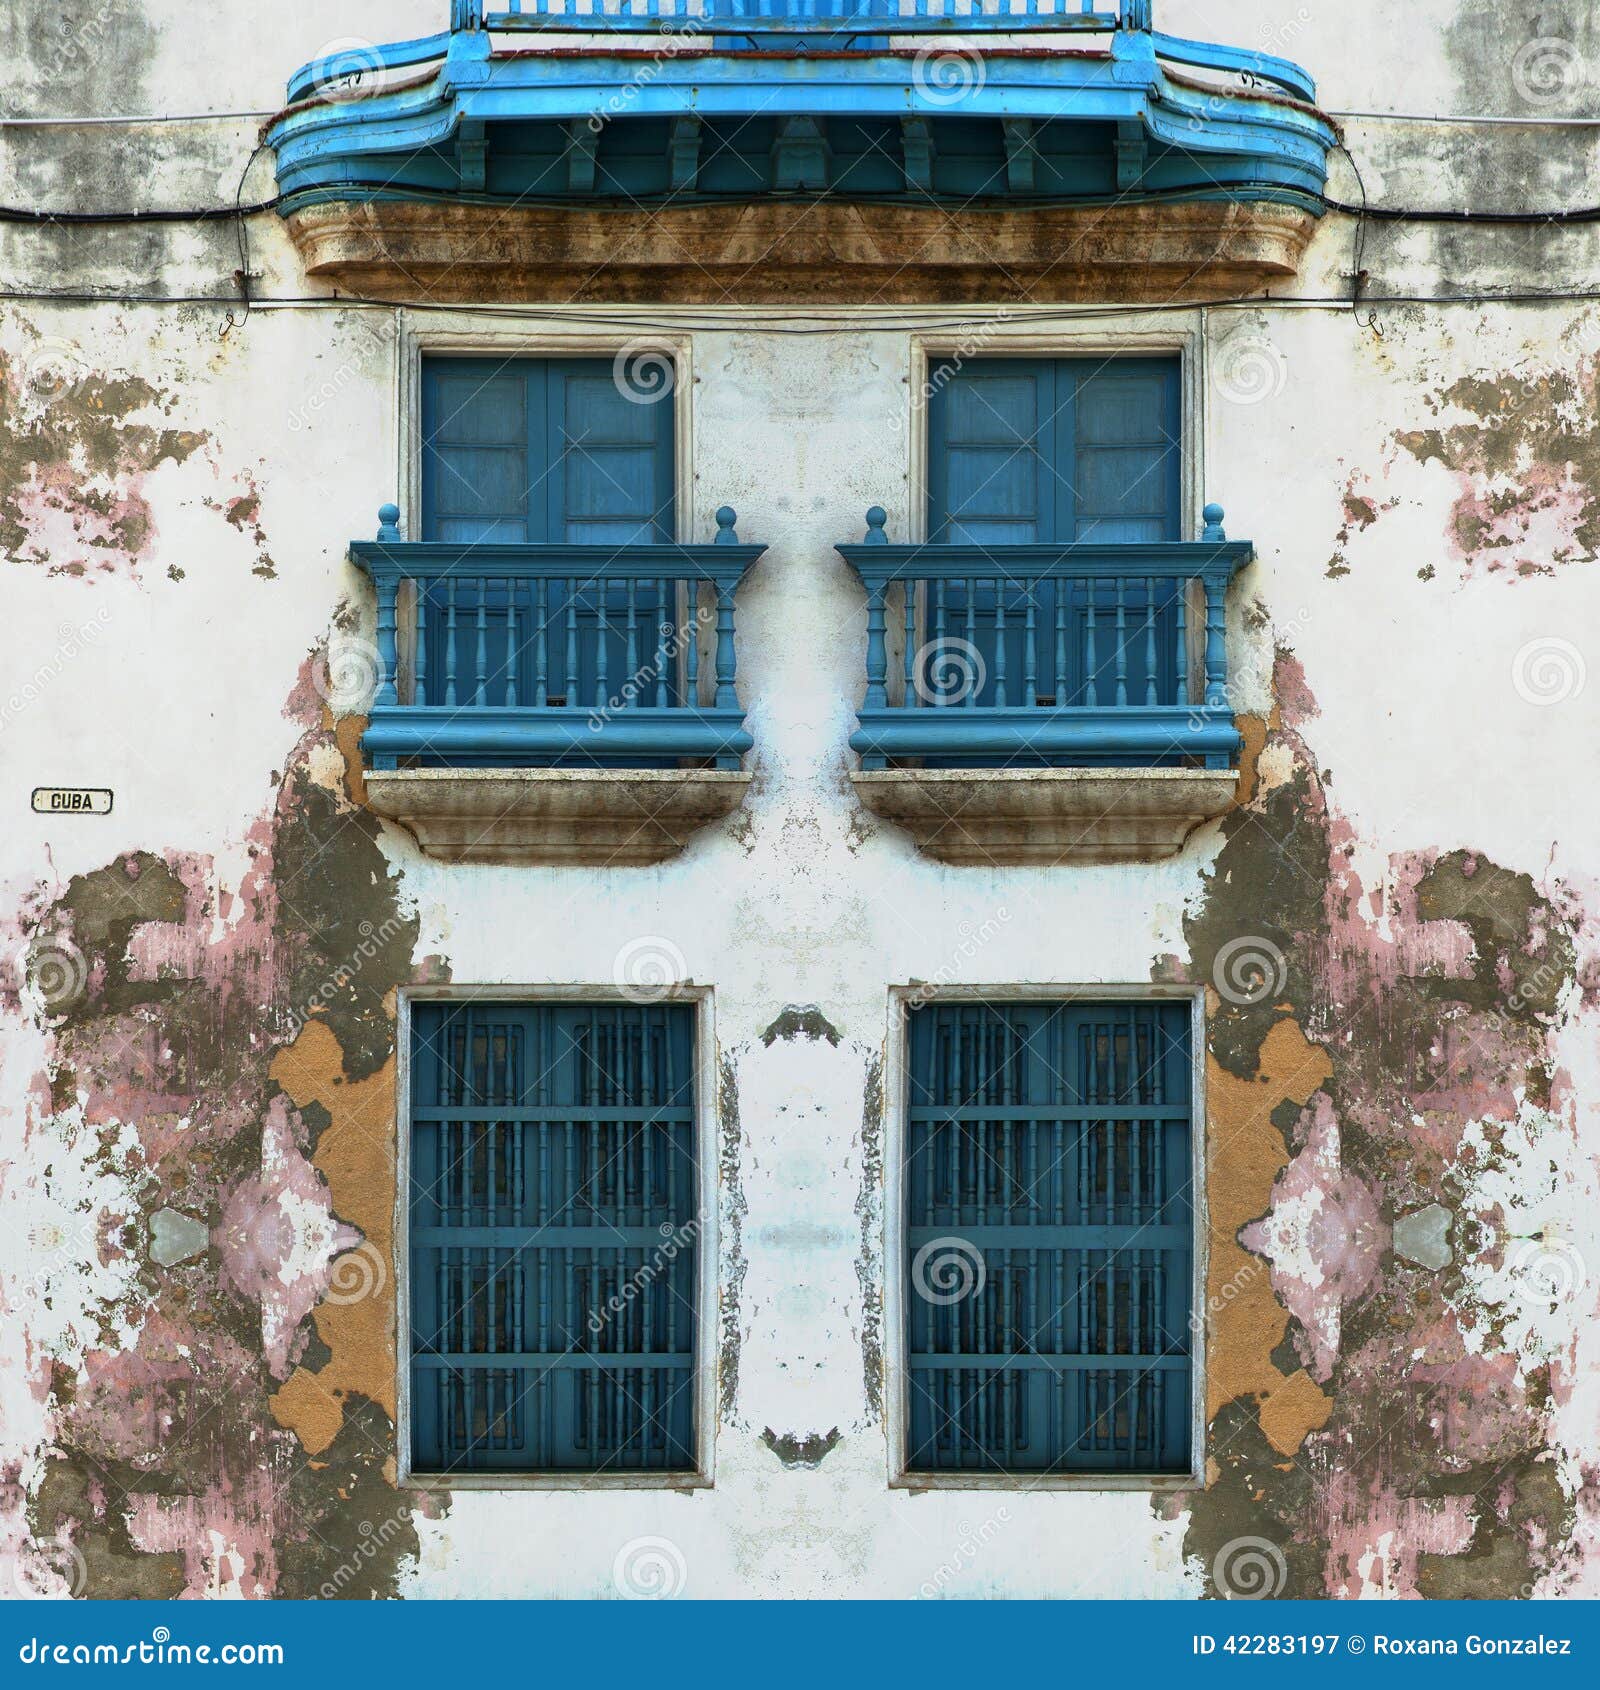 eroded old havana facade with blue windows